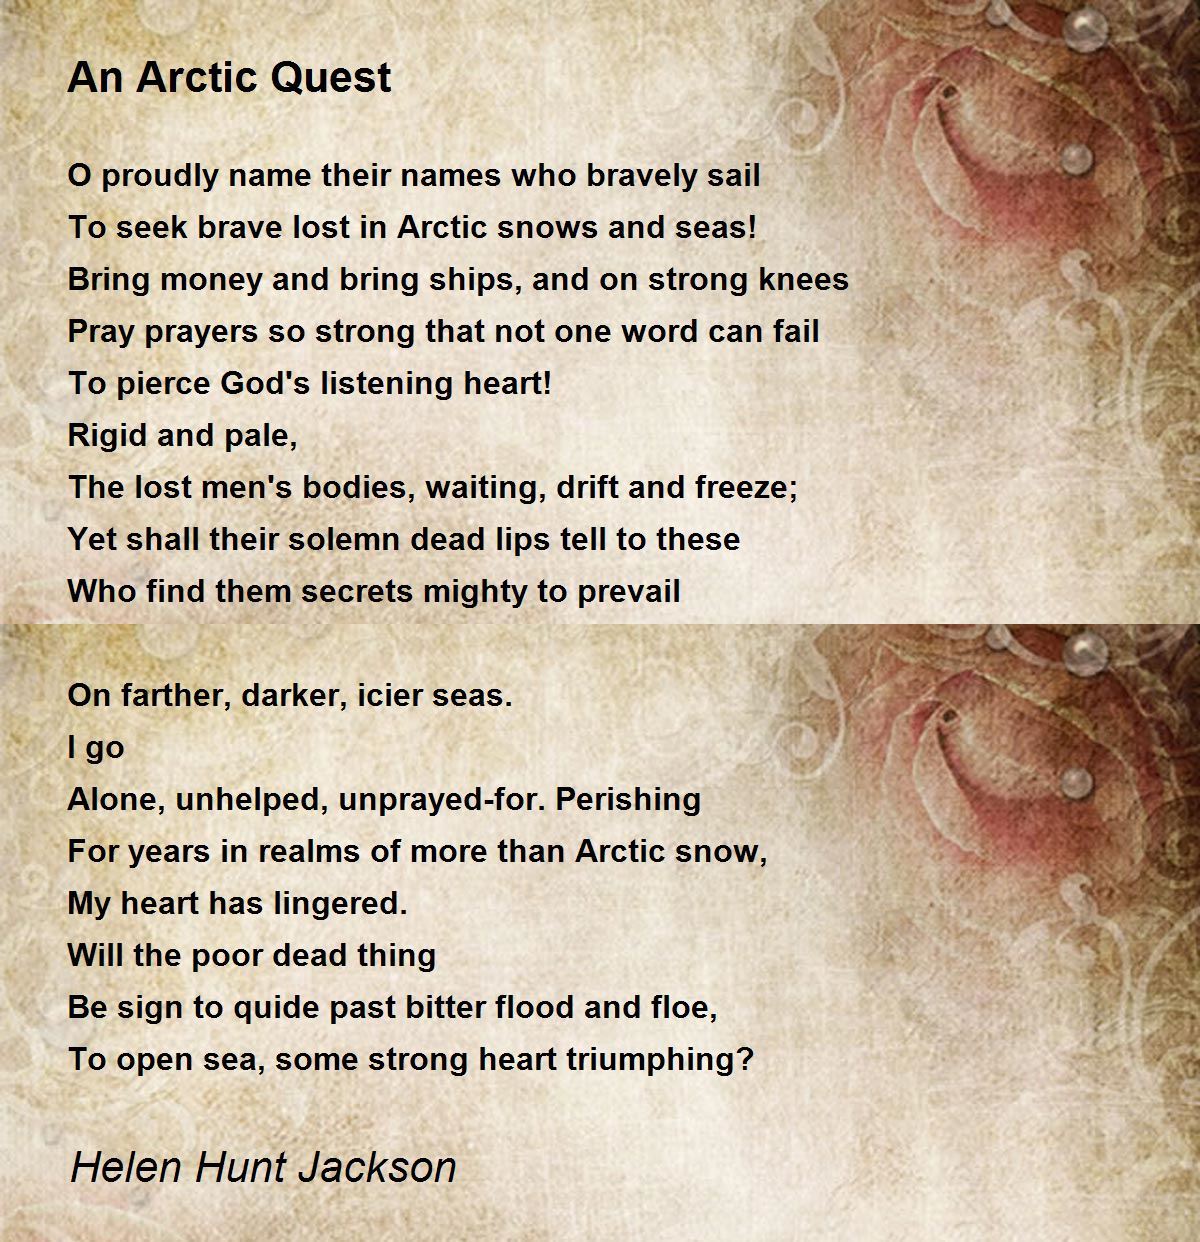 https://img.poemhunter.com/i/poem_images/261/an-arctic-quest.jpg